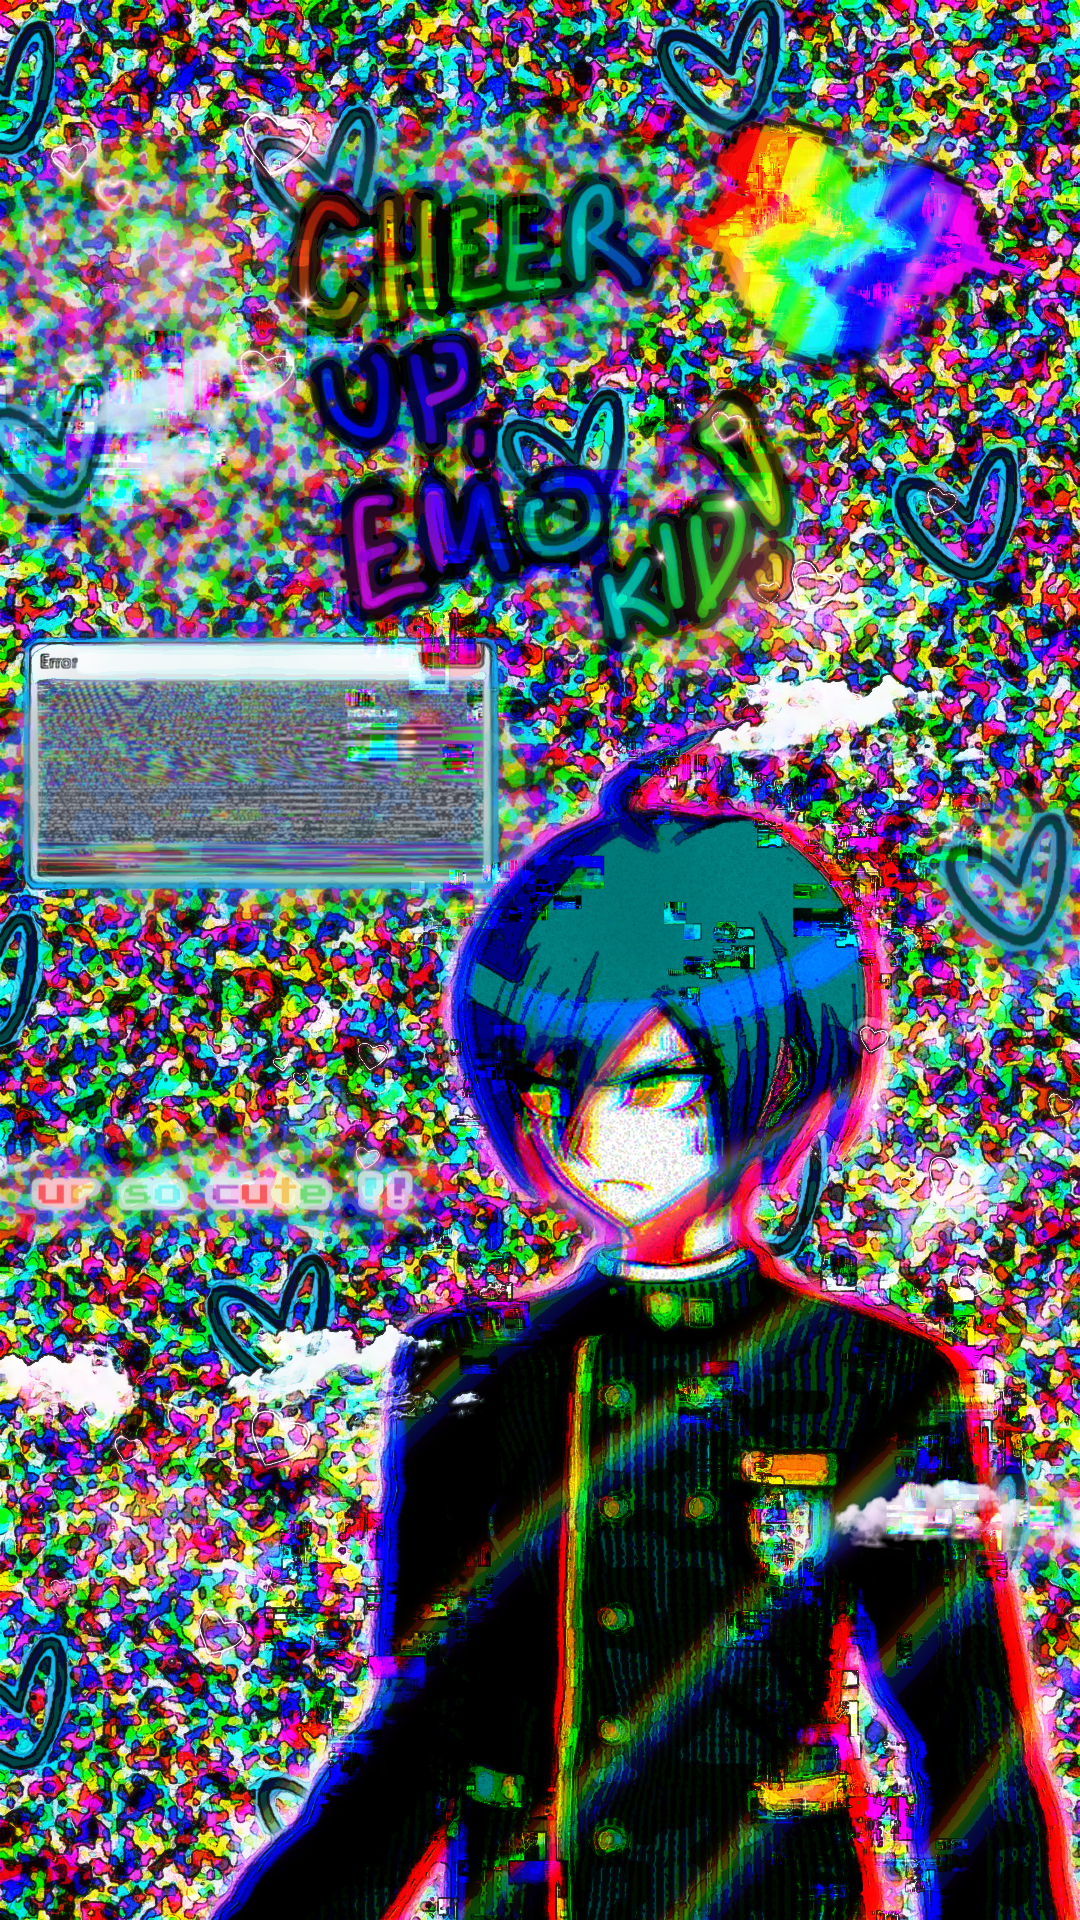 Another glitch core wallpaper